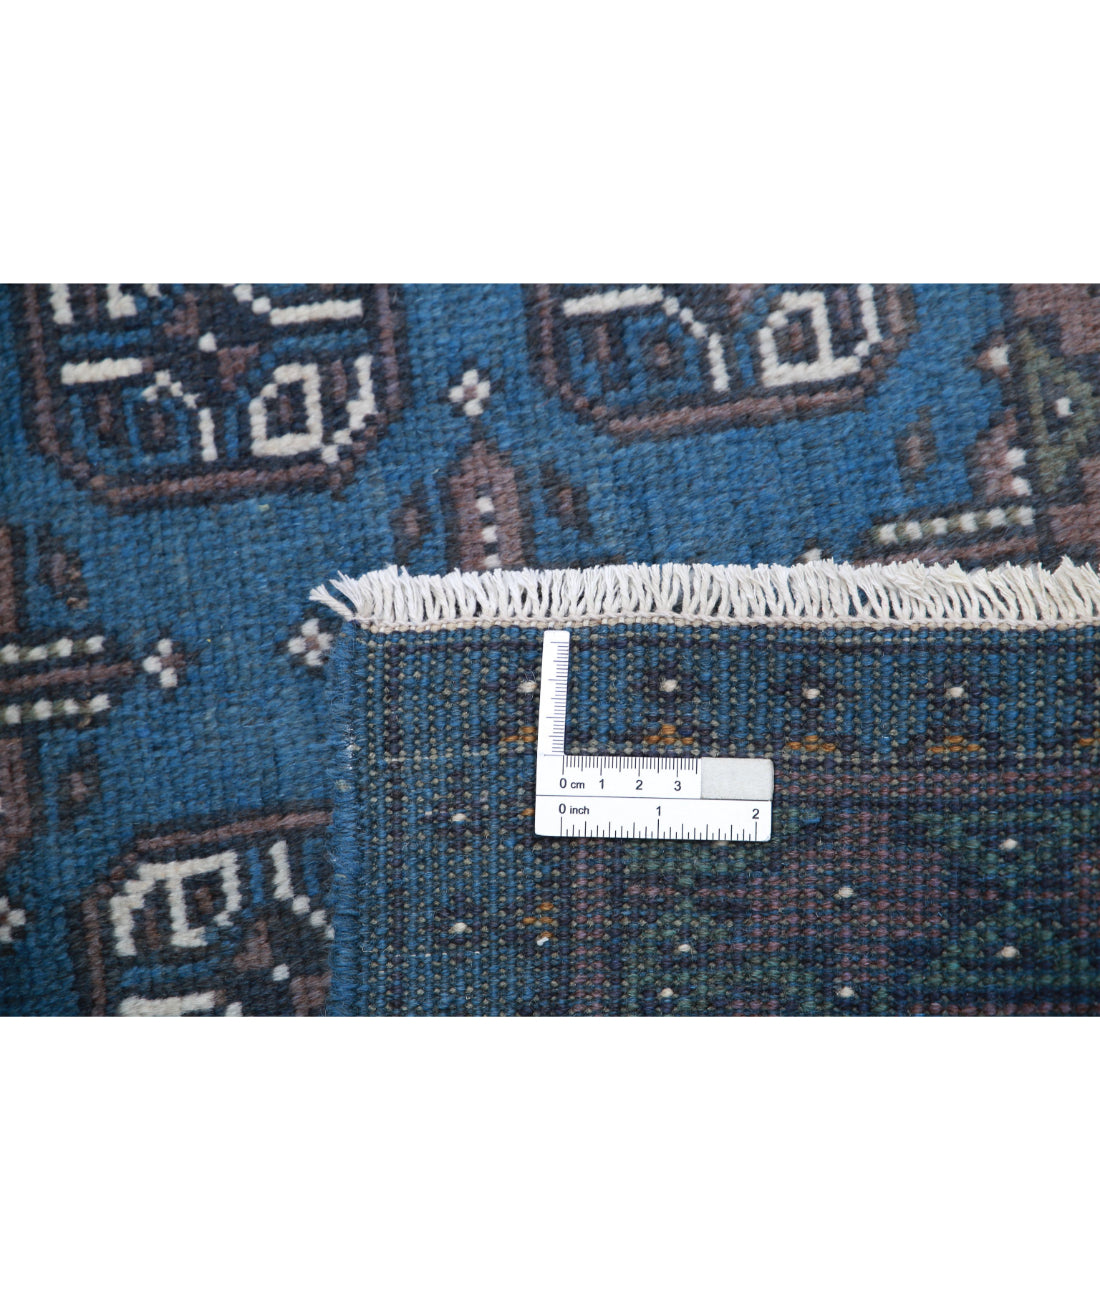 Revival 3'4'' X 4'9'' Hand-Knotted Wool Rug 3'4'' x 4'9'' (100 X 143) / Blue / Gold